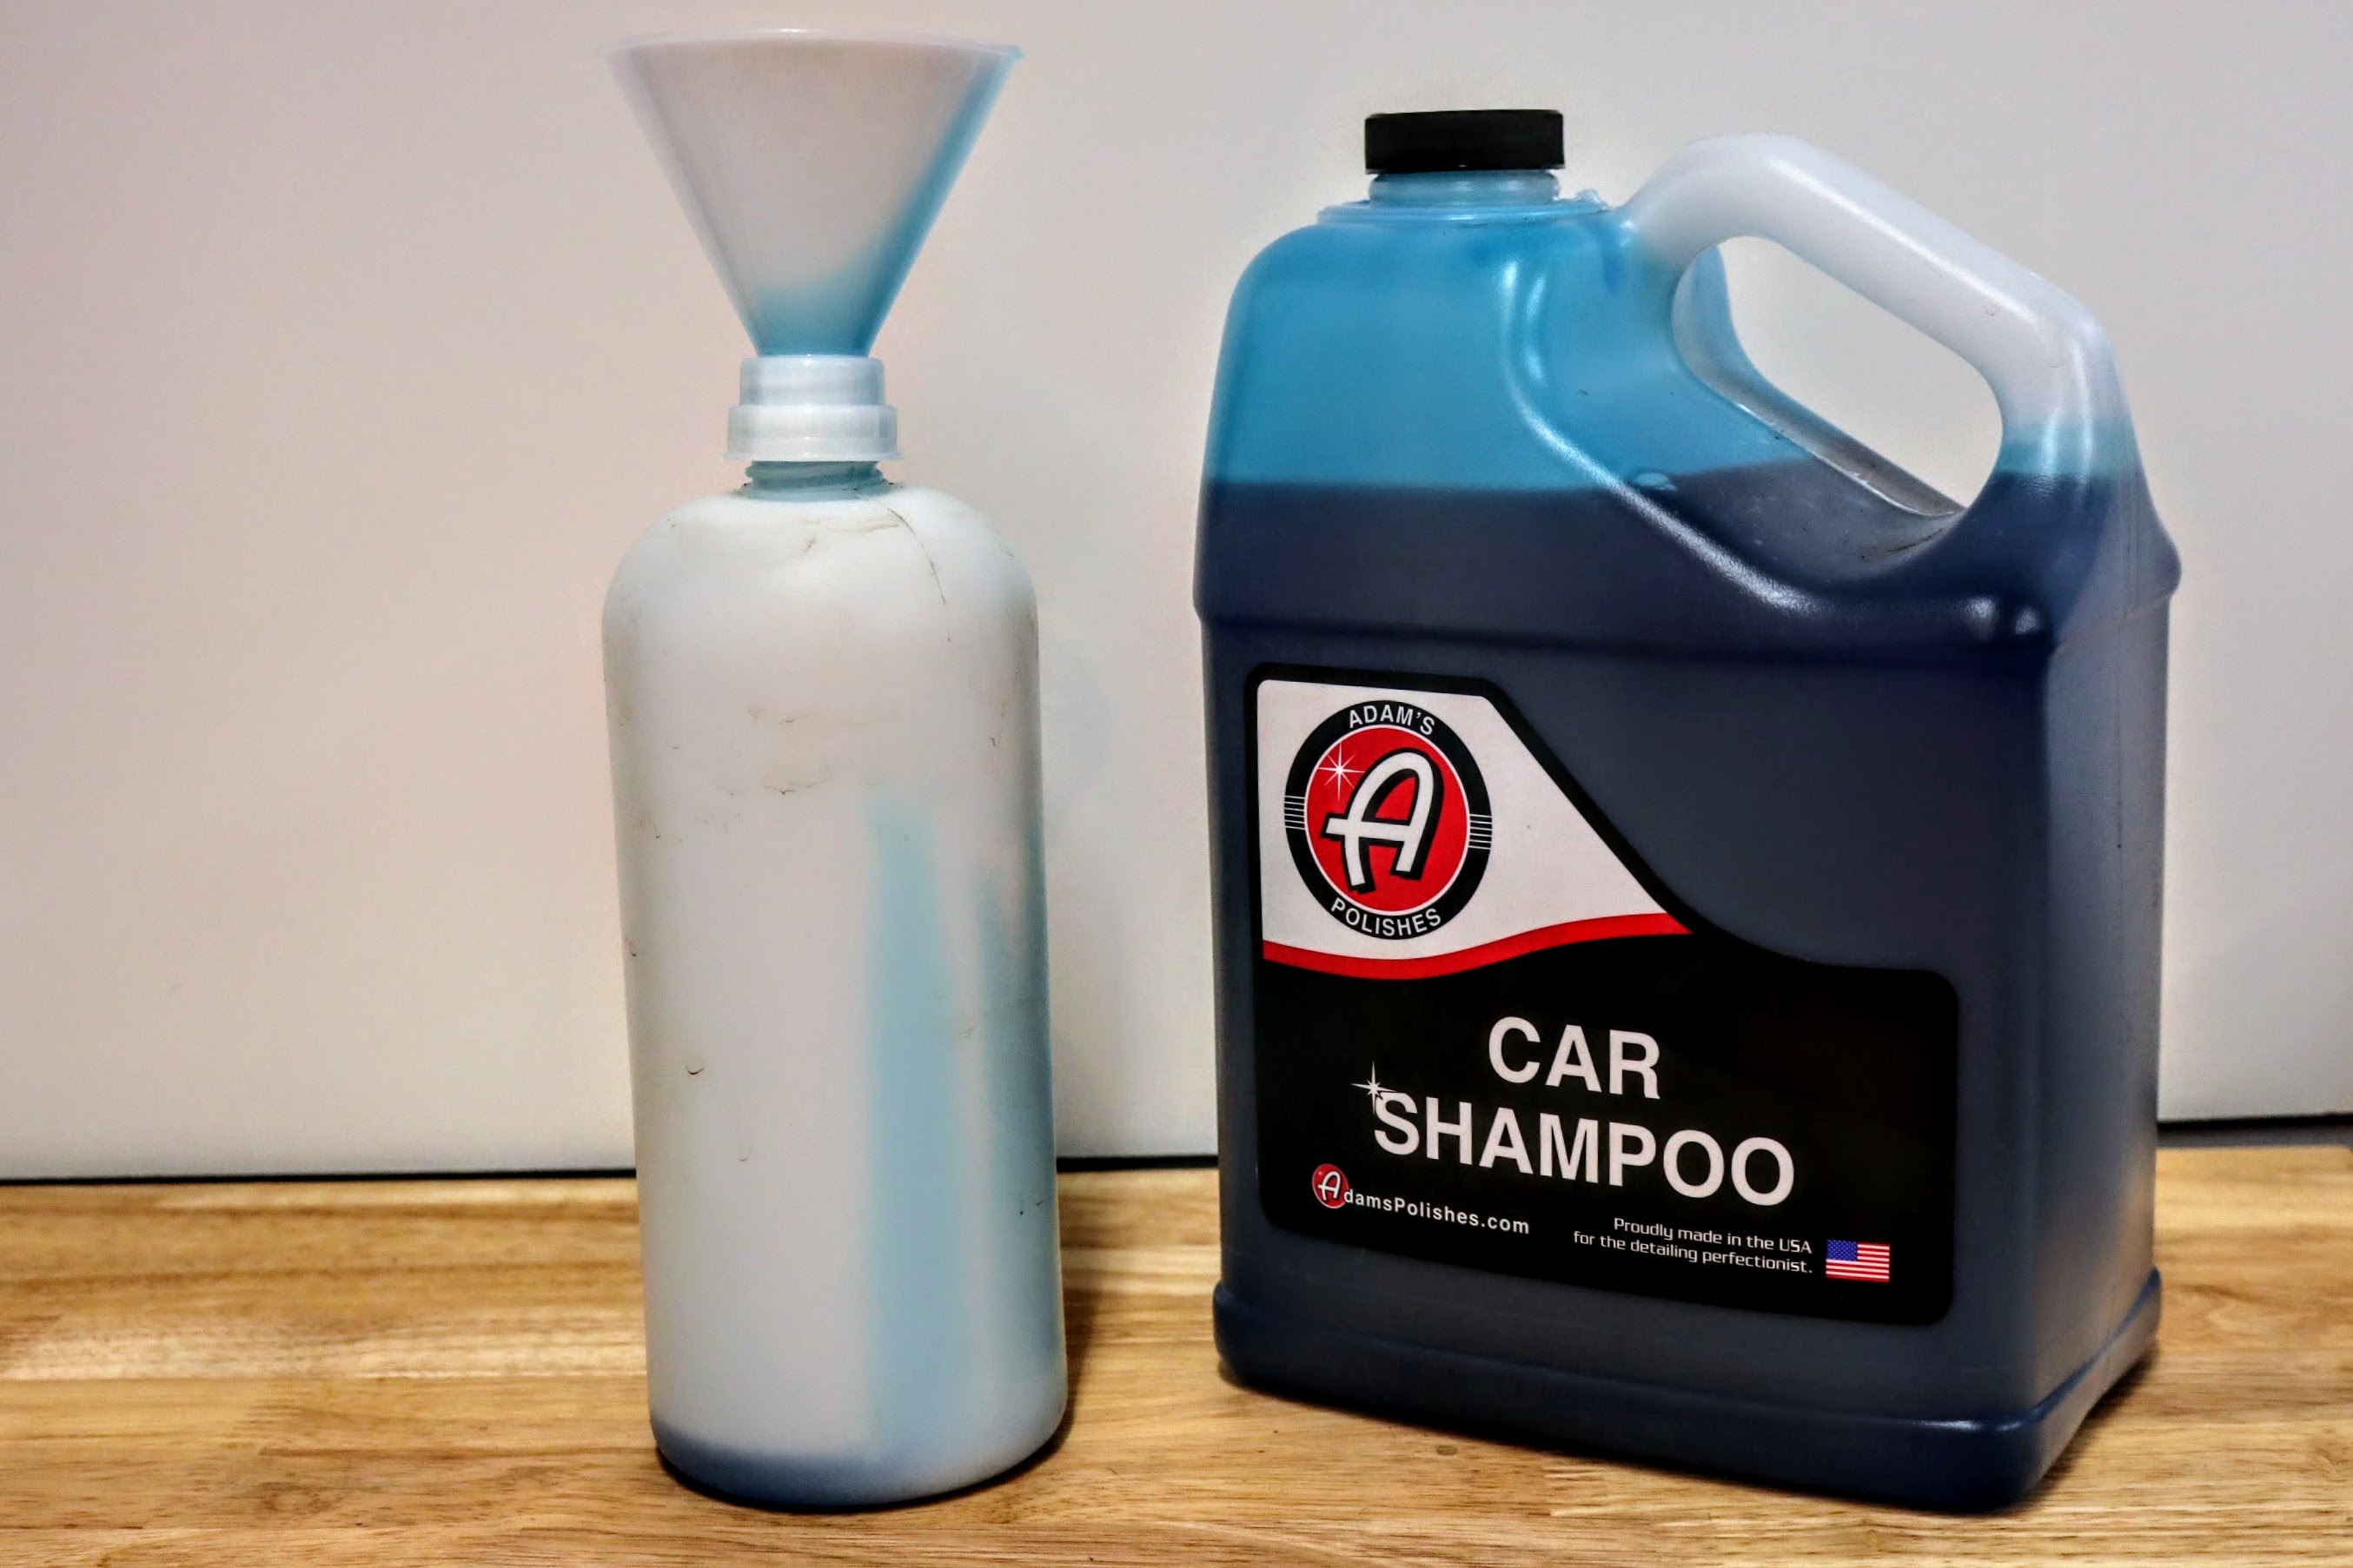 Filling the foam lance bottle with Adam's Polishes Car Shampoo